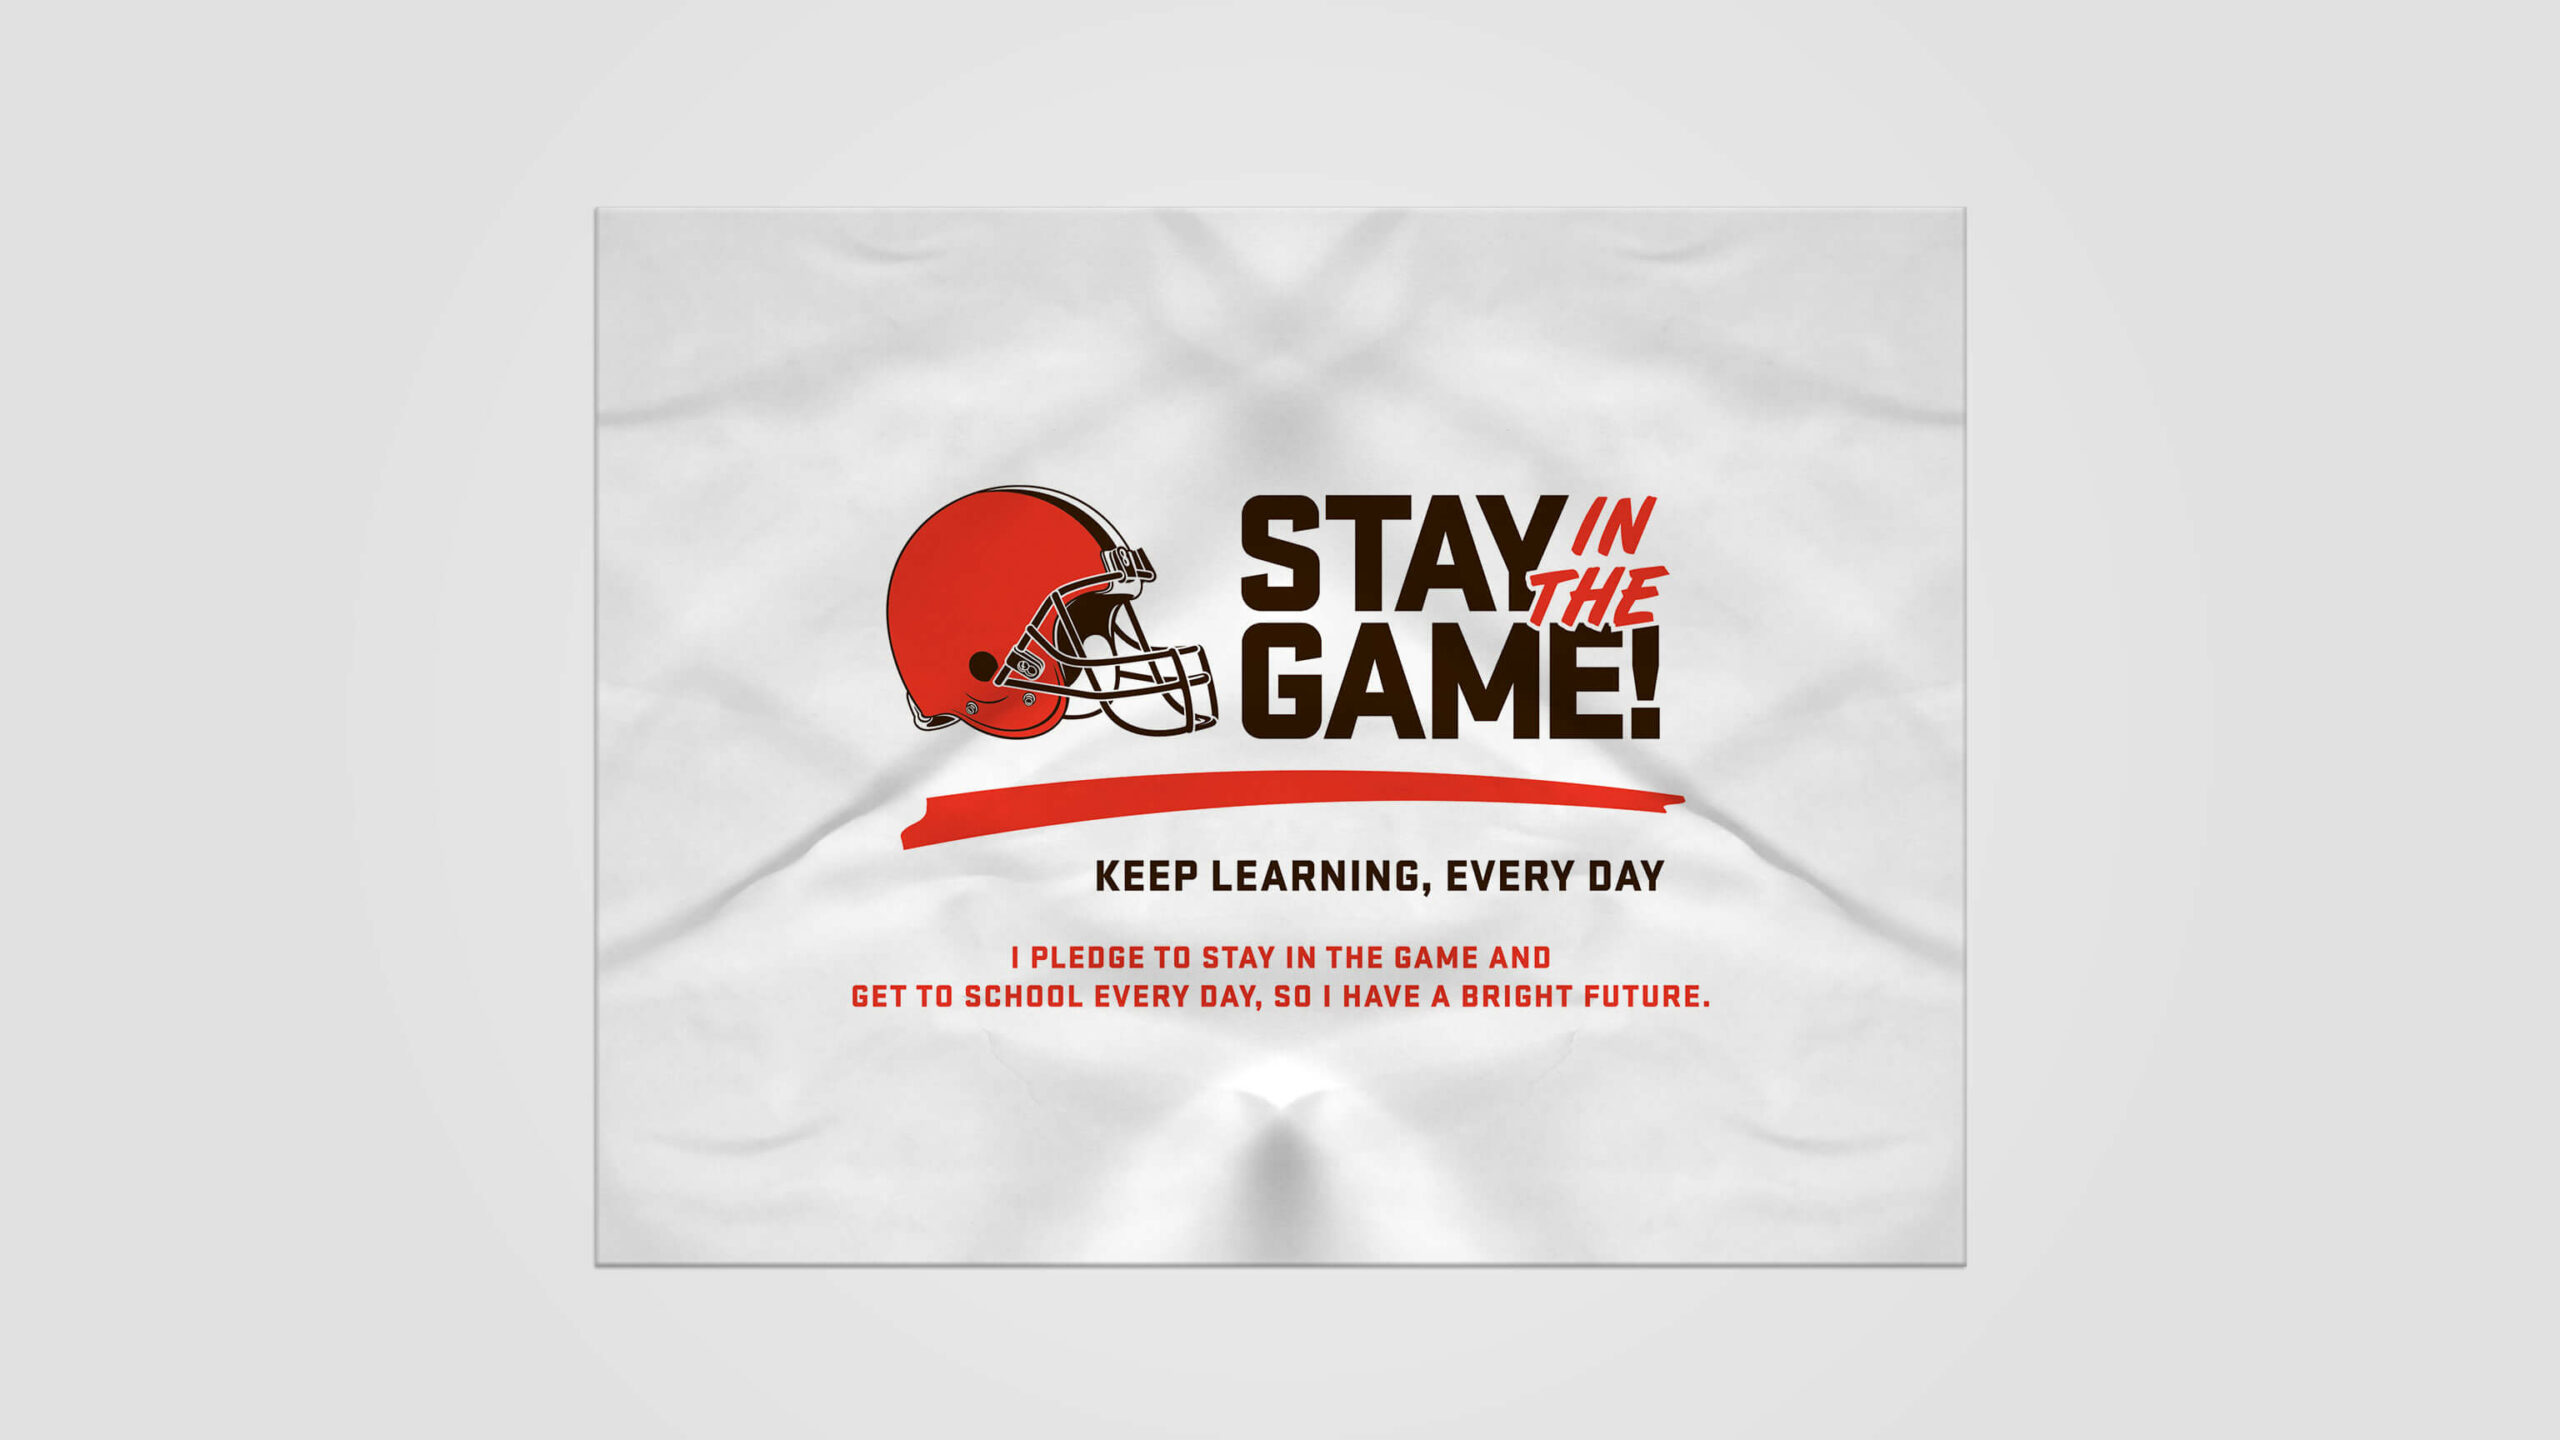 Stay in the Game pledge poster